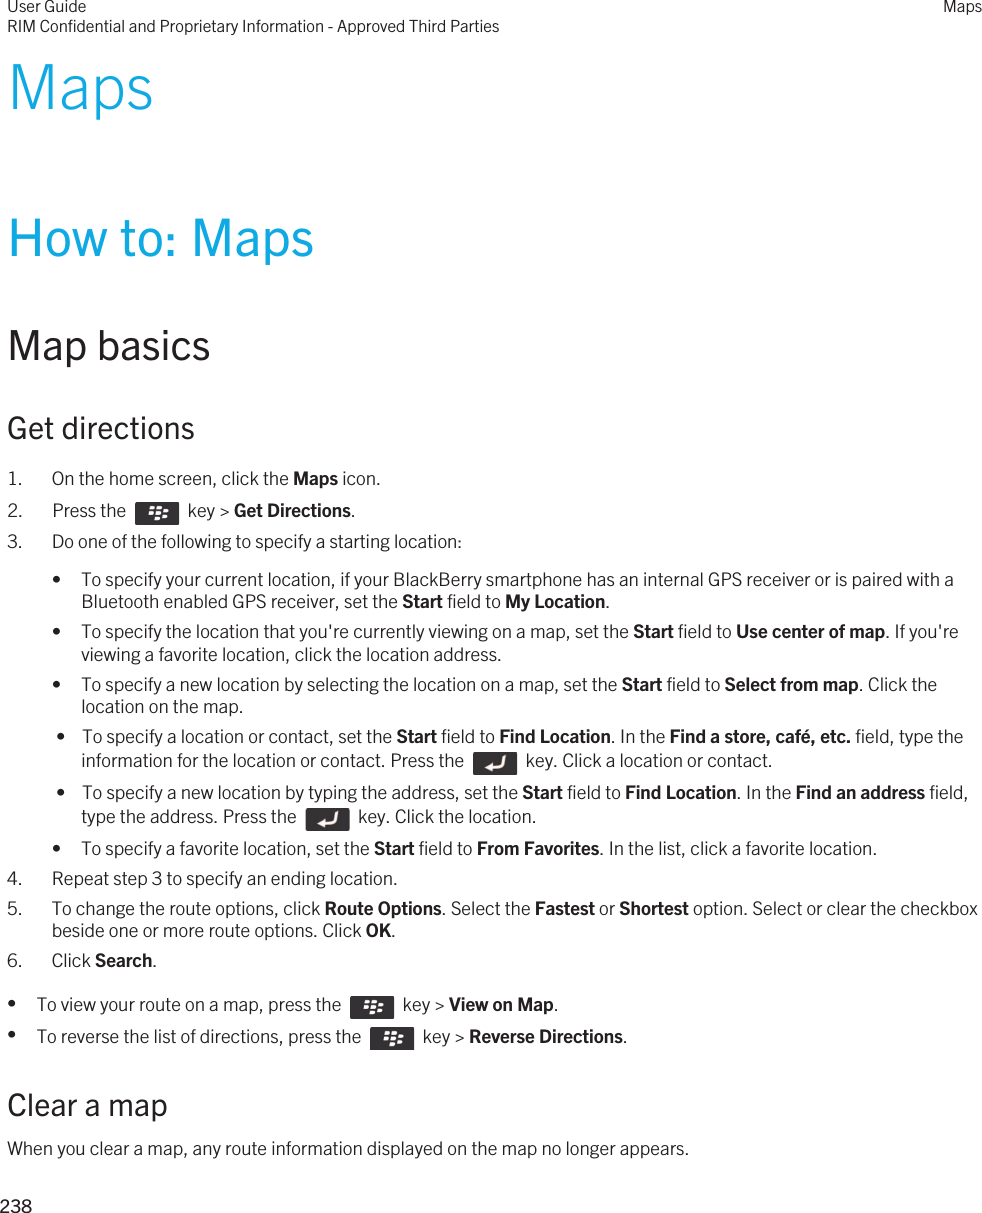 MapsHow to: MapsMap basicsGet directions1. On the home screen, click the Maps icon.2.  Press the    key &gt; Get Directions. 3. Do one of the following to specify a starting location:• To specify your current location, if your BlackBerry smartphone has an internal GPS receiver or is paired with a Bluetooth enabled GPS receiver, set the Start field to My Location.• To specify the location that you&apos;re currently viewing on a map, set the Start field to Use center of map. If you&apos;re viewing a favorite location, click the location address.• To specify a new location by selecting the location on a map, set the Start field to Select from map. Click the location on the map. •  To specify a location or contact, set the Start field to Find Location. In the Find a store, café, etc. field, type the information for the location or contact. Press the    key. Click a location or contact. •  To specify a new location by typing the address, set the Start field to Find Location. In the Find an address field, type the address. Press the    key. Click the location.• To specify a favorite location, set the Start field to From Favorites. In the list, click a favorite location.4. Repeat step 3 to specify an ending location.5. To change the route options, click Route Options. Select the Fastest or Shortest option. Select or clear the checkbox beside one or more route options. Click OK.6. Click Search.•To view your route on a map, press the    key &gt; View on Map.•To reverse the list of directions, press the    key &gt; Reverse Directions.Clear a mapWhen you clear a map, any route information displayed on the map no longer appears.User GuideRIM Confidential and Proprietary Information - Approved Third PartiesMaps238 